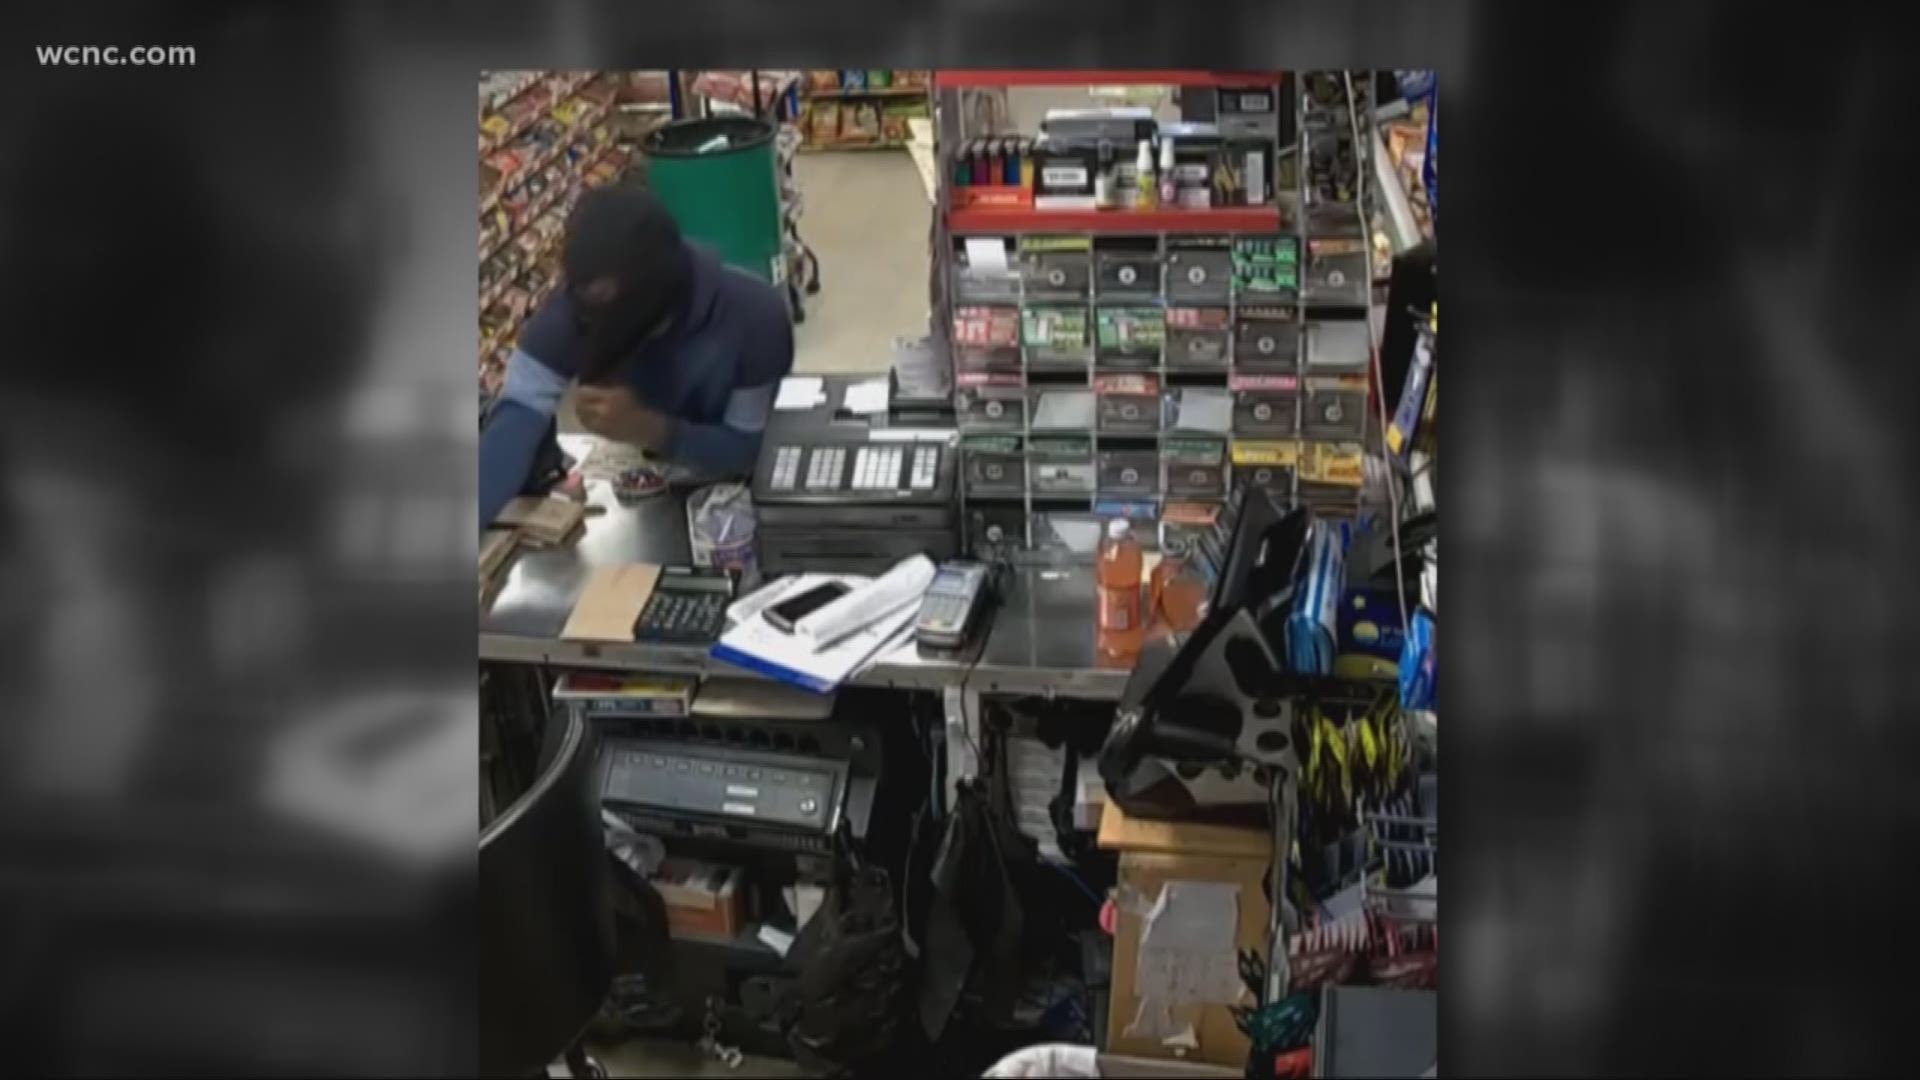 The store owner said the clerk started working for him in 2002. The shooter is still on the loose, but CMPD released photographs of the suspect.